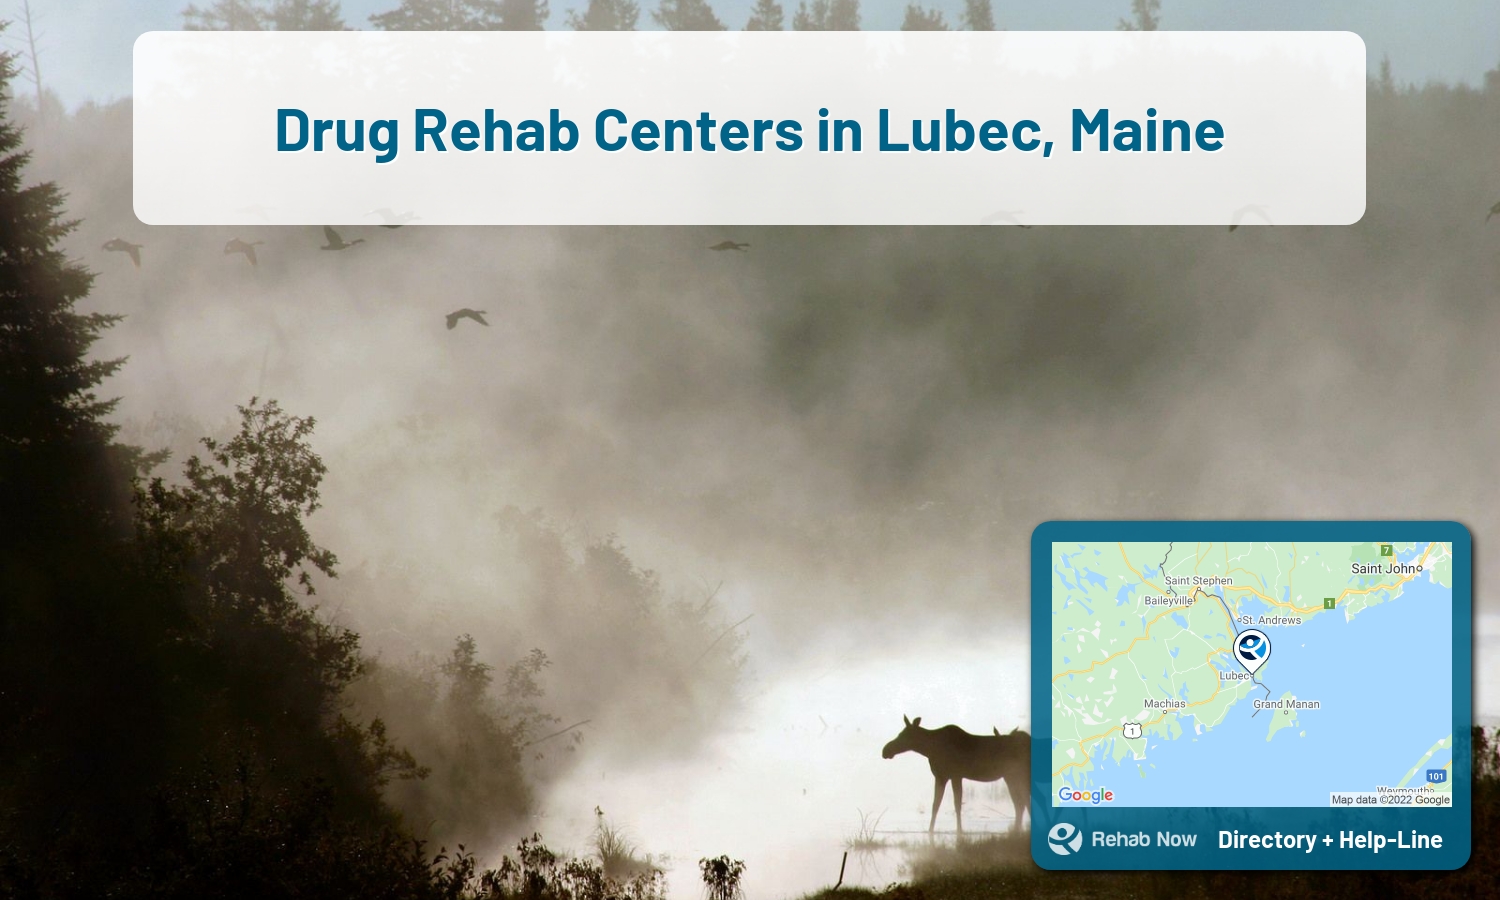 List of alcohol and drug treatment centers near you in Lubec, Maine. Research certifications, programs, methods, pricing, and more.